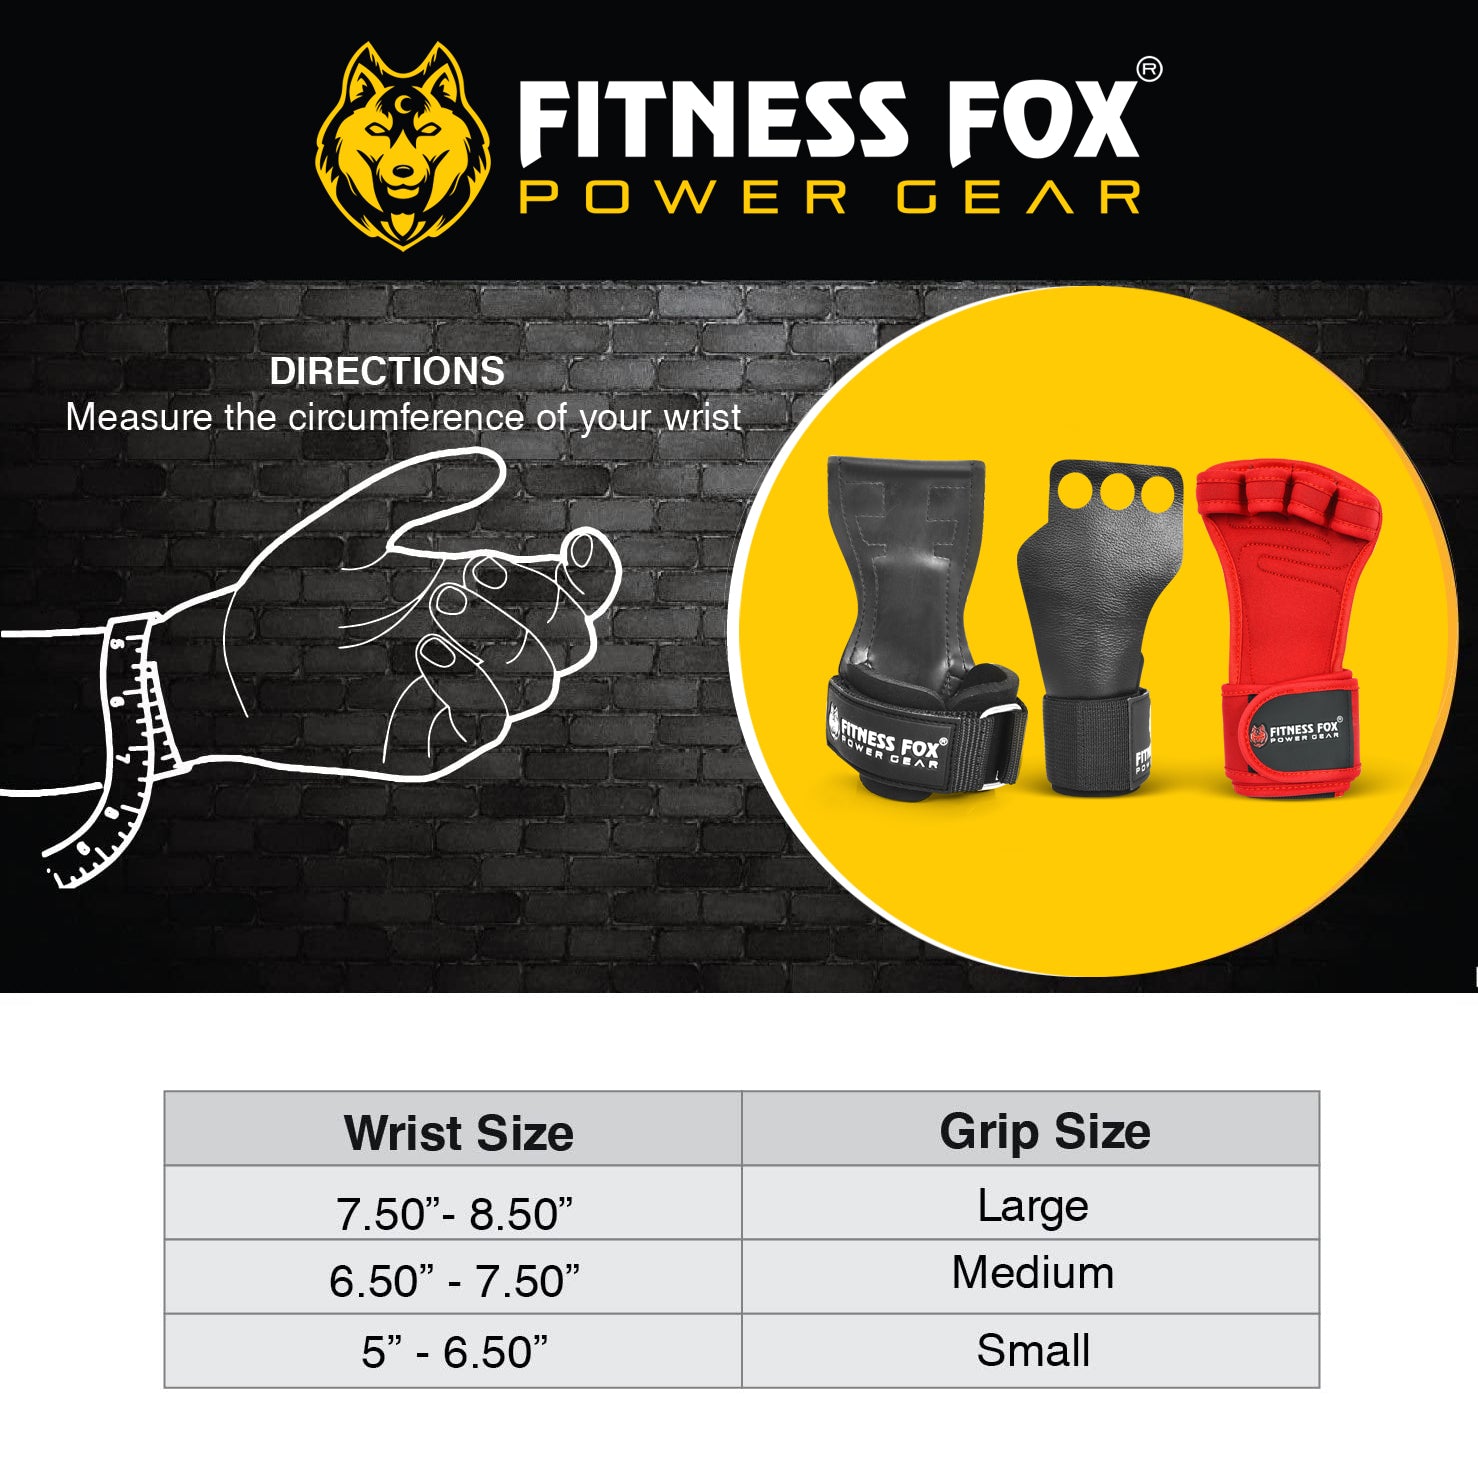 FITNESS FOX Lifting Finger Grips for Weightlifting, Kettlebells, Deadlifts Pull Ups